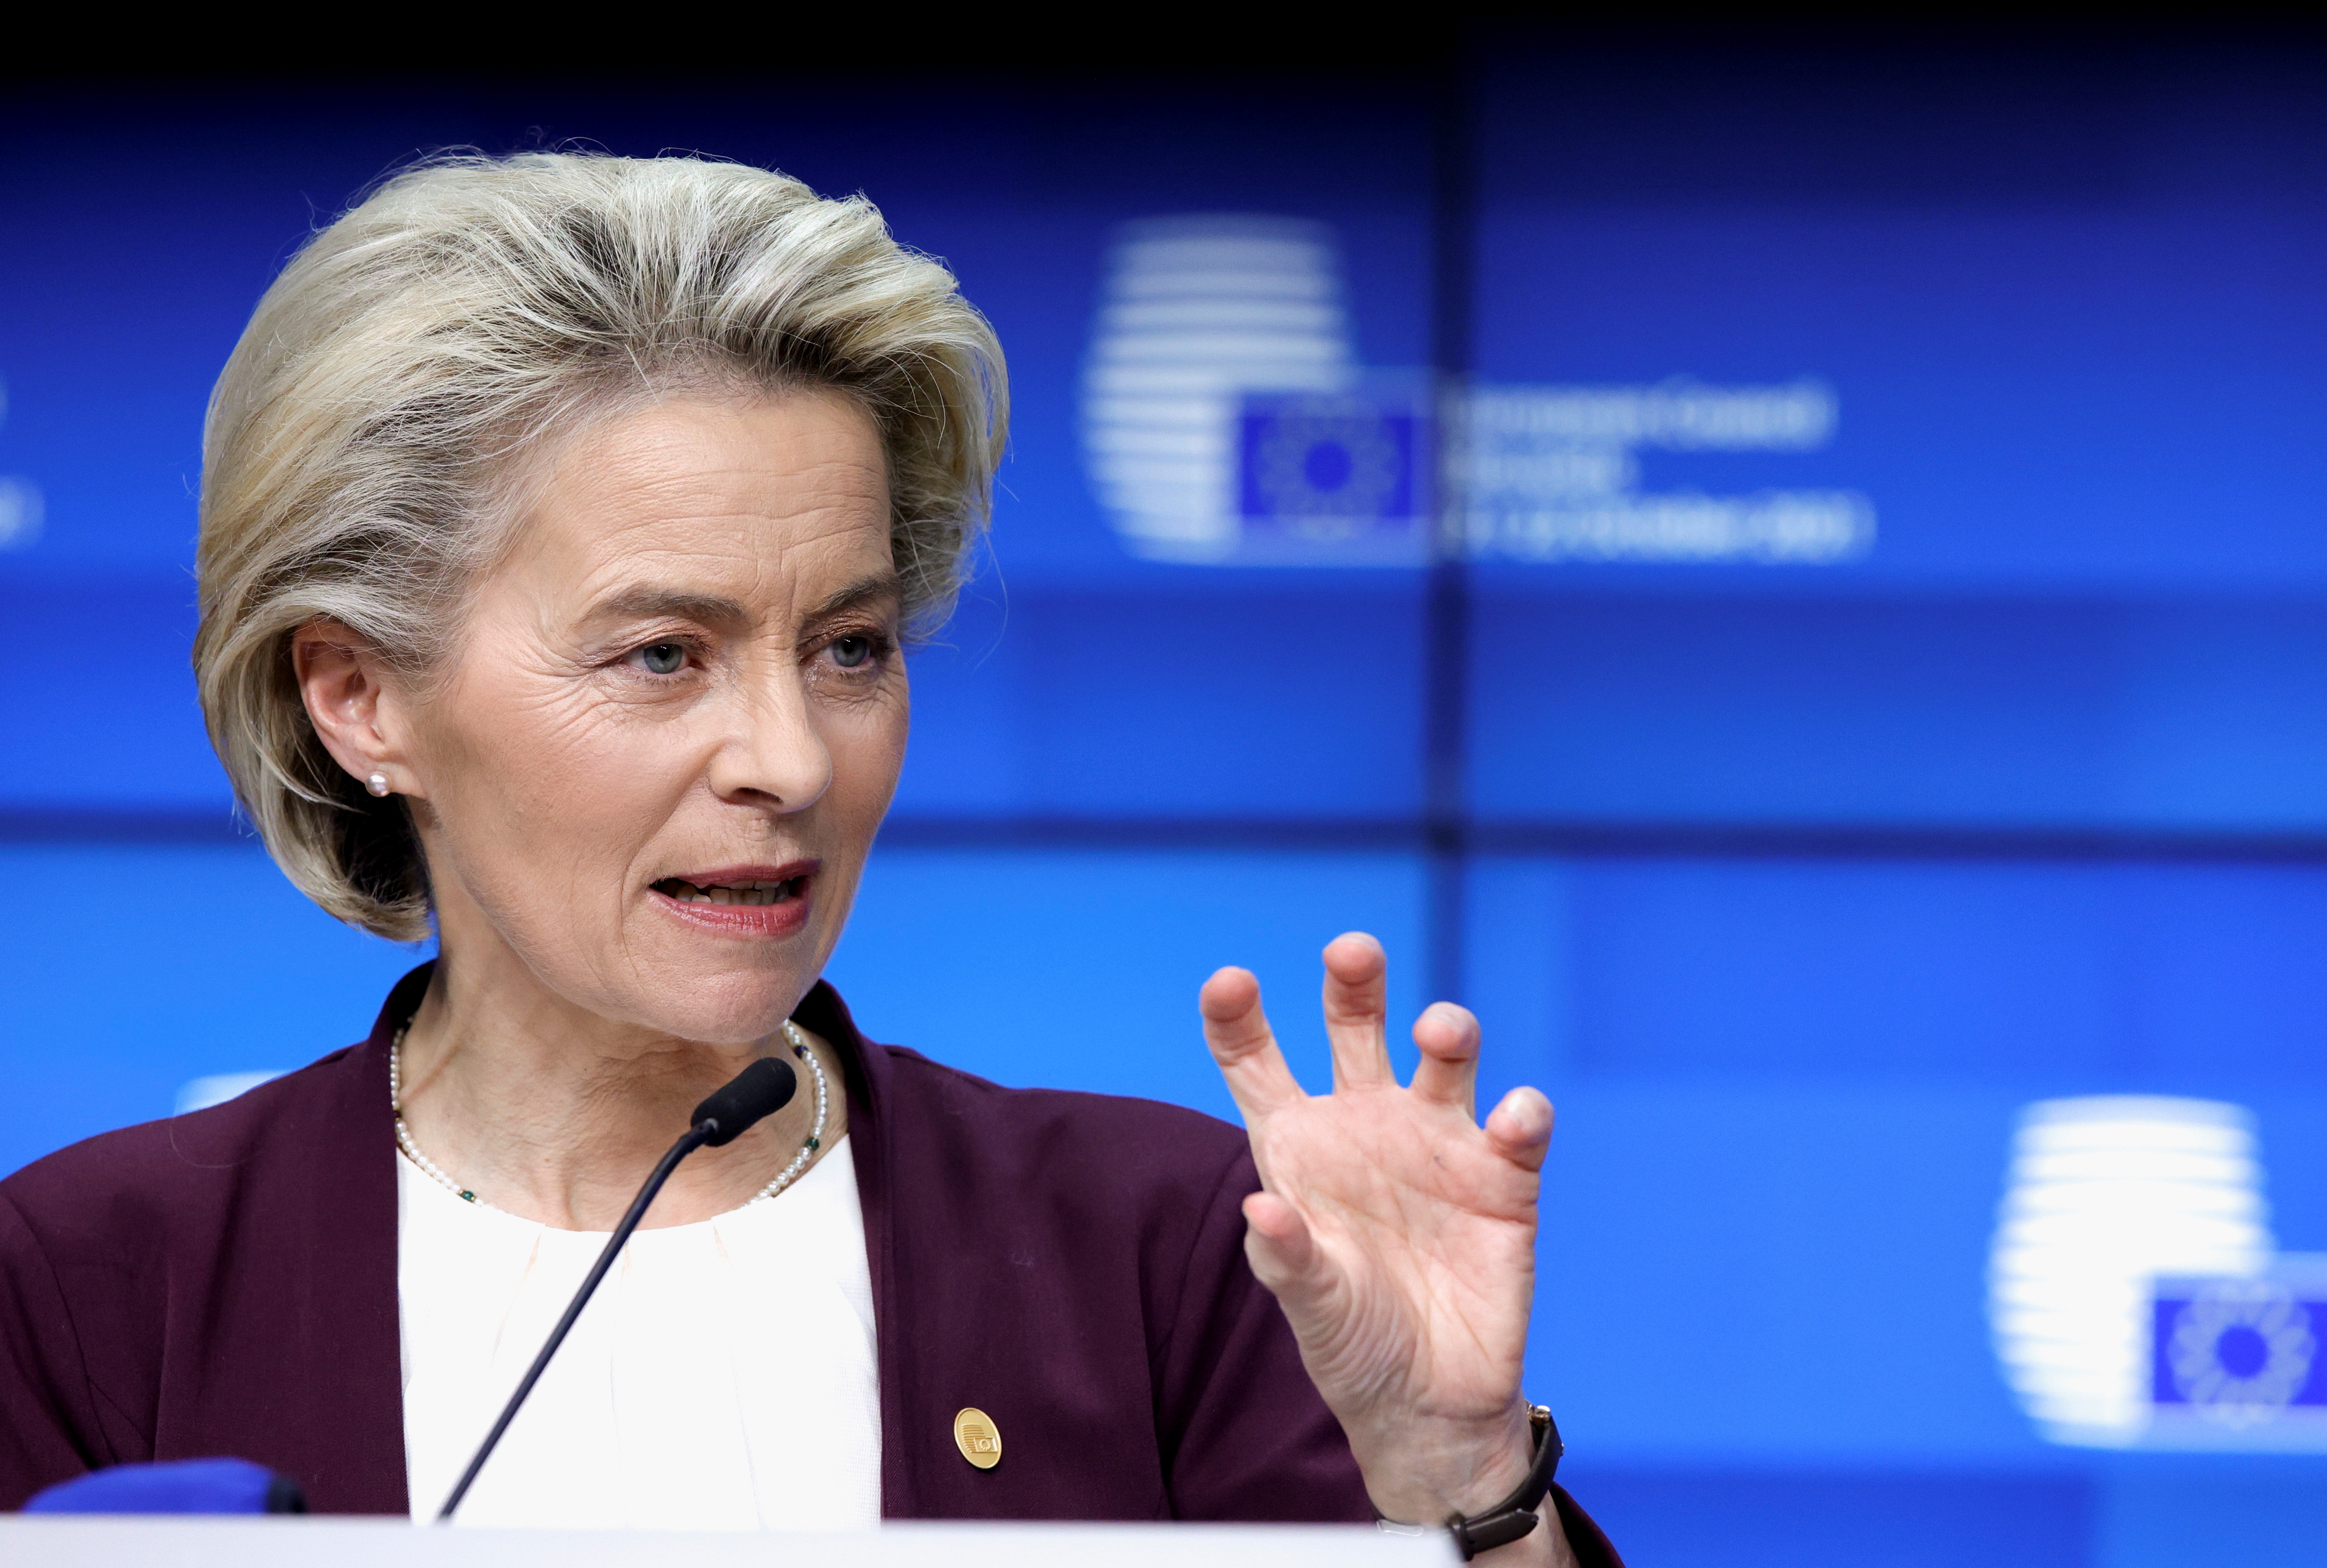 European Commission President Ursula von der Leyen speaks at a news conference during the EU summit in Brussels, Belgium October 22, 2021. Olivier Matthys/Pool via REUTERS/File Photo